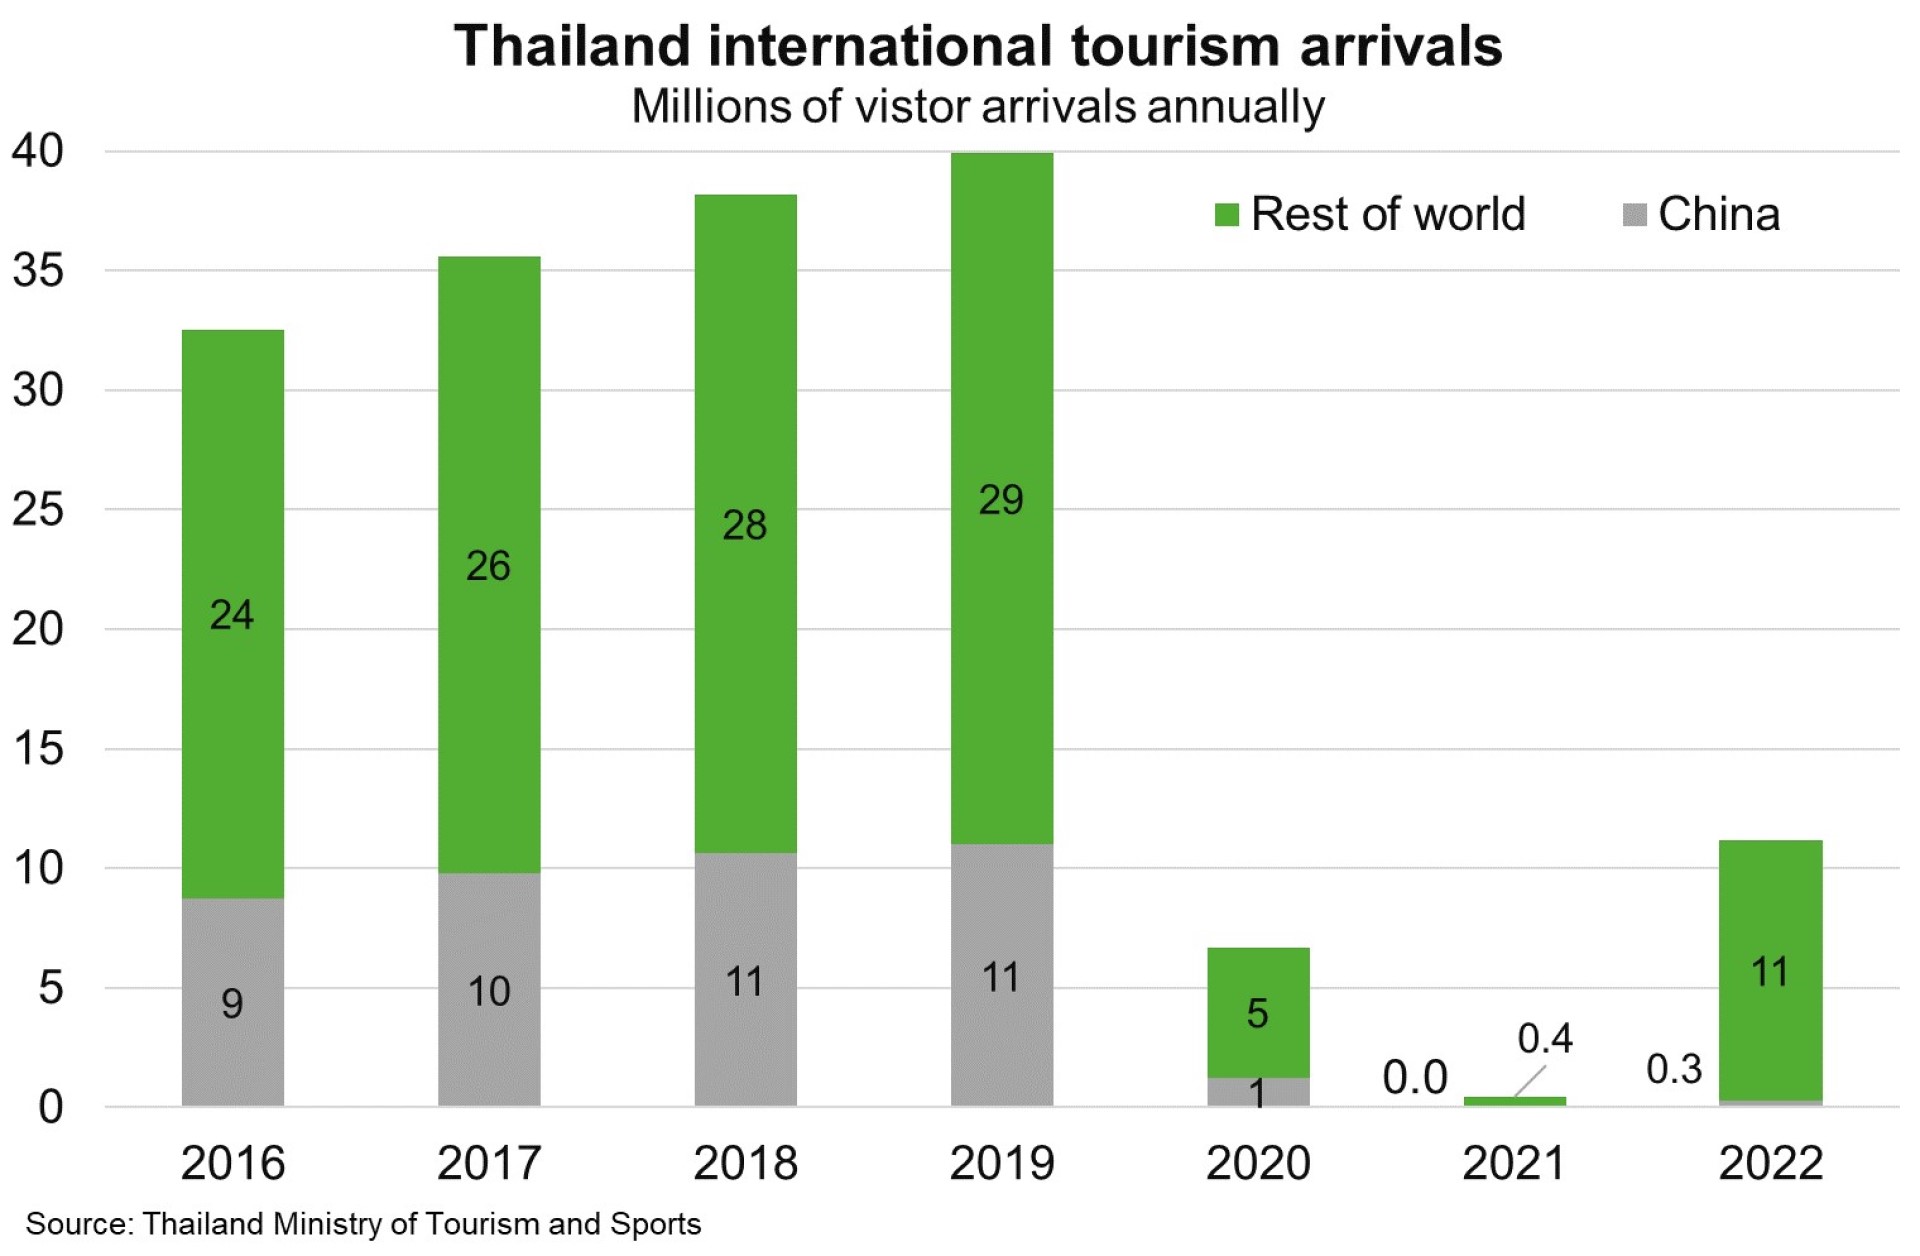 Thailand’s large tourism sector will benefit significantly from another year of open international borders and China’s reopening.